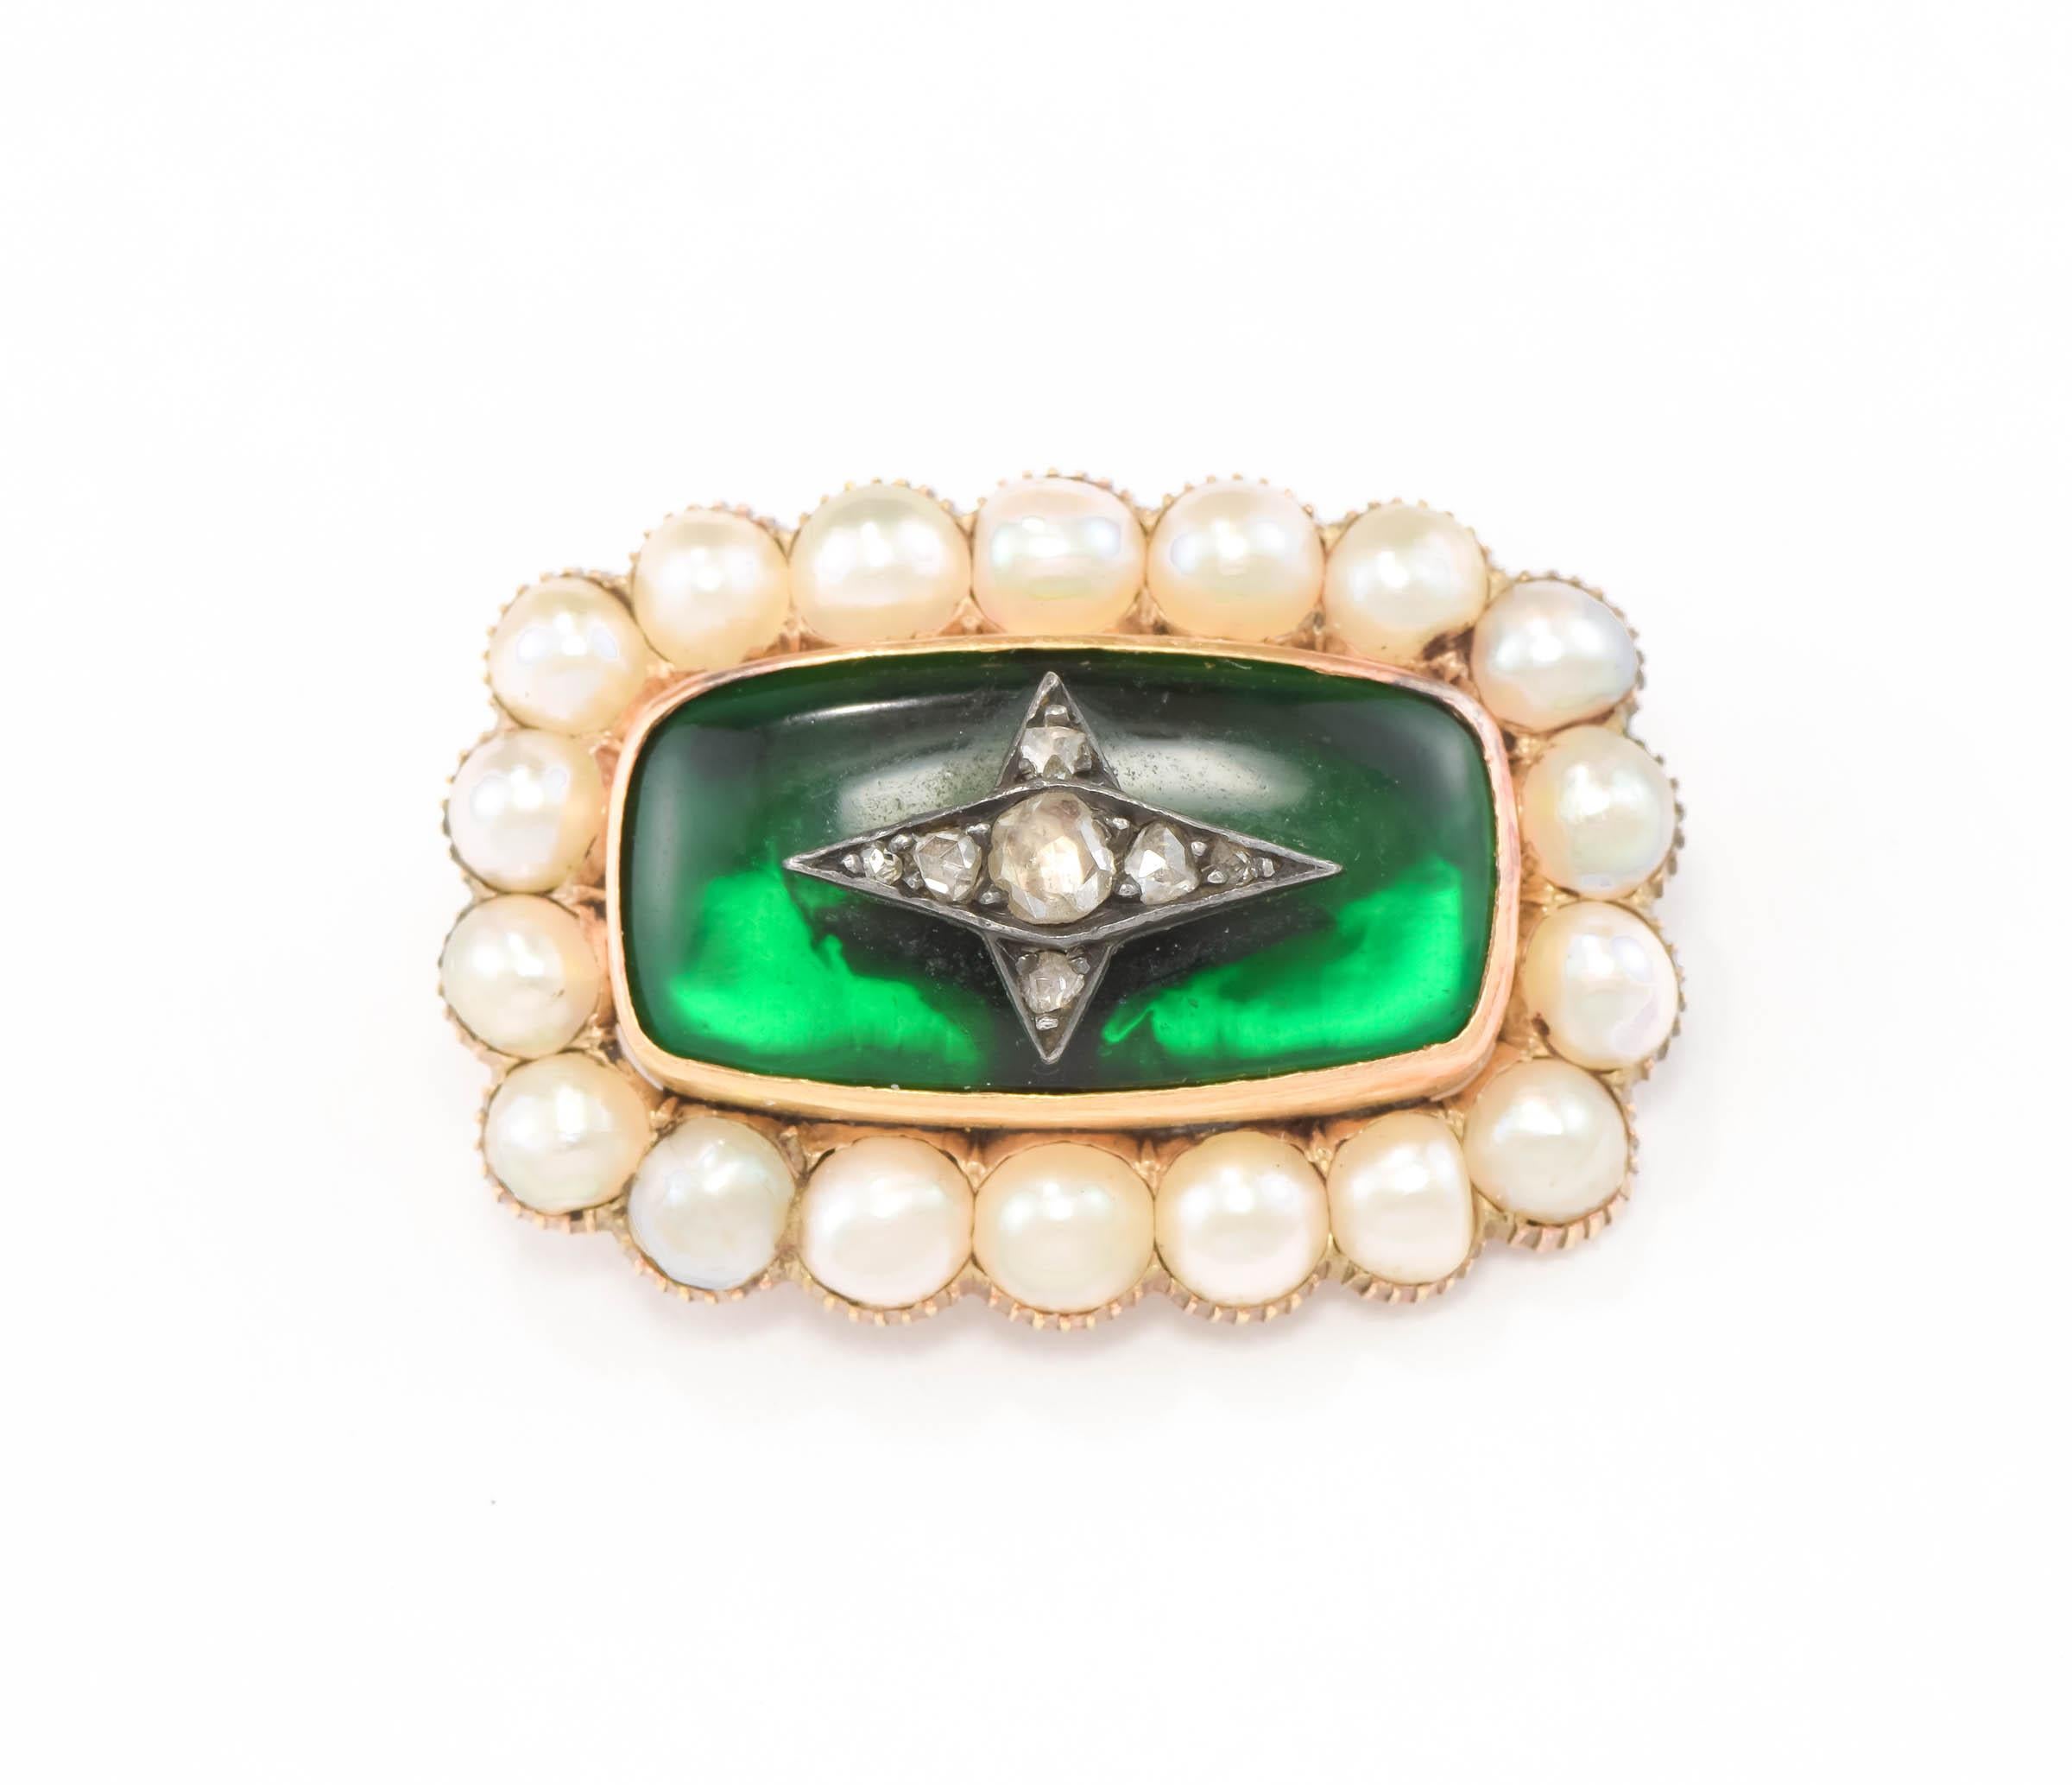 Antique Diamond Star Brooch Pin with Glowing Green & Pearls - or Convert to Ring For Sale 4